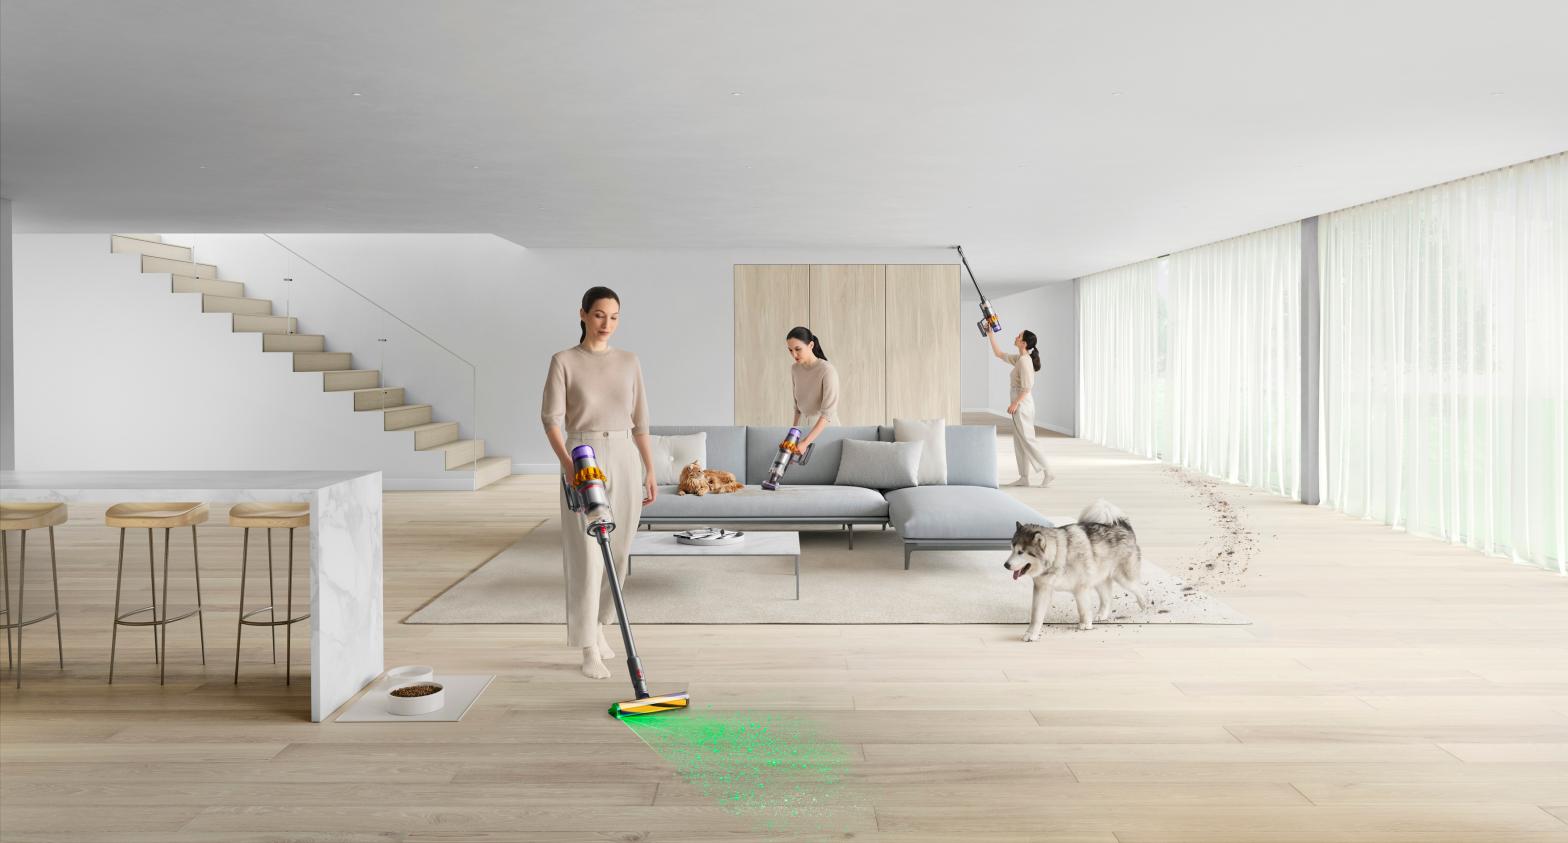 A woman, seemingly in three places at once, cleans up after dirty pets in a large, relatively unfurnished space using Dyson attachments on a V15